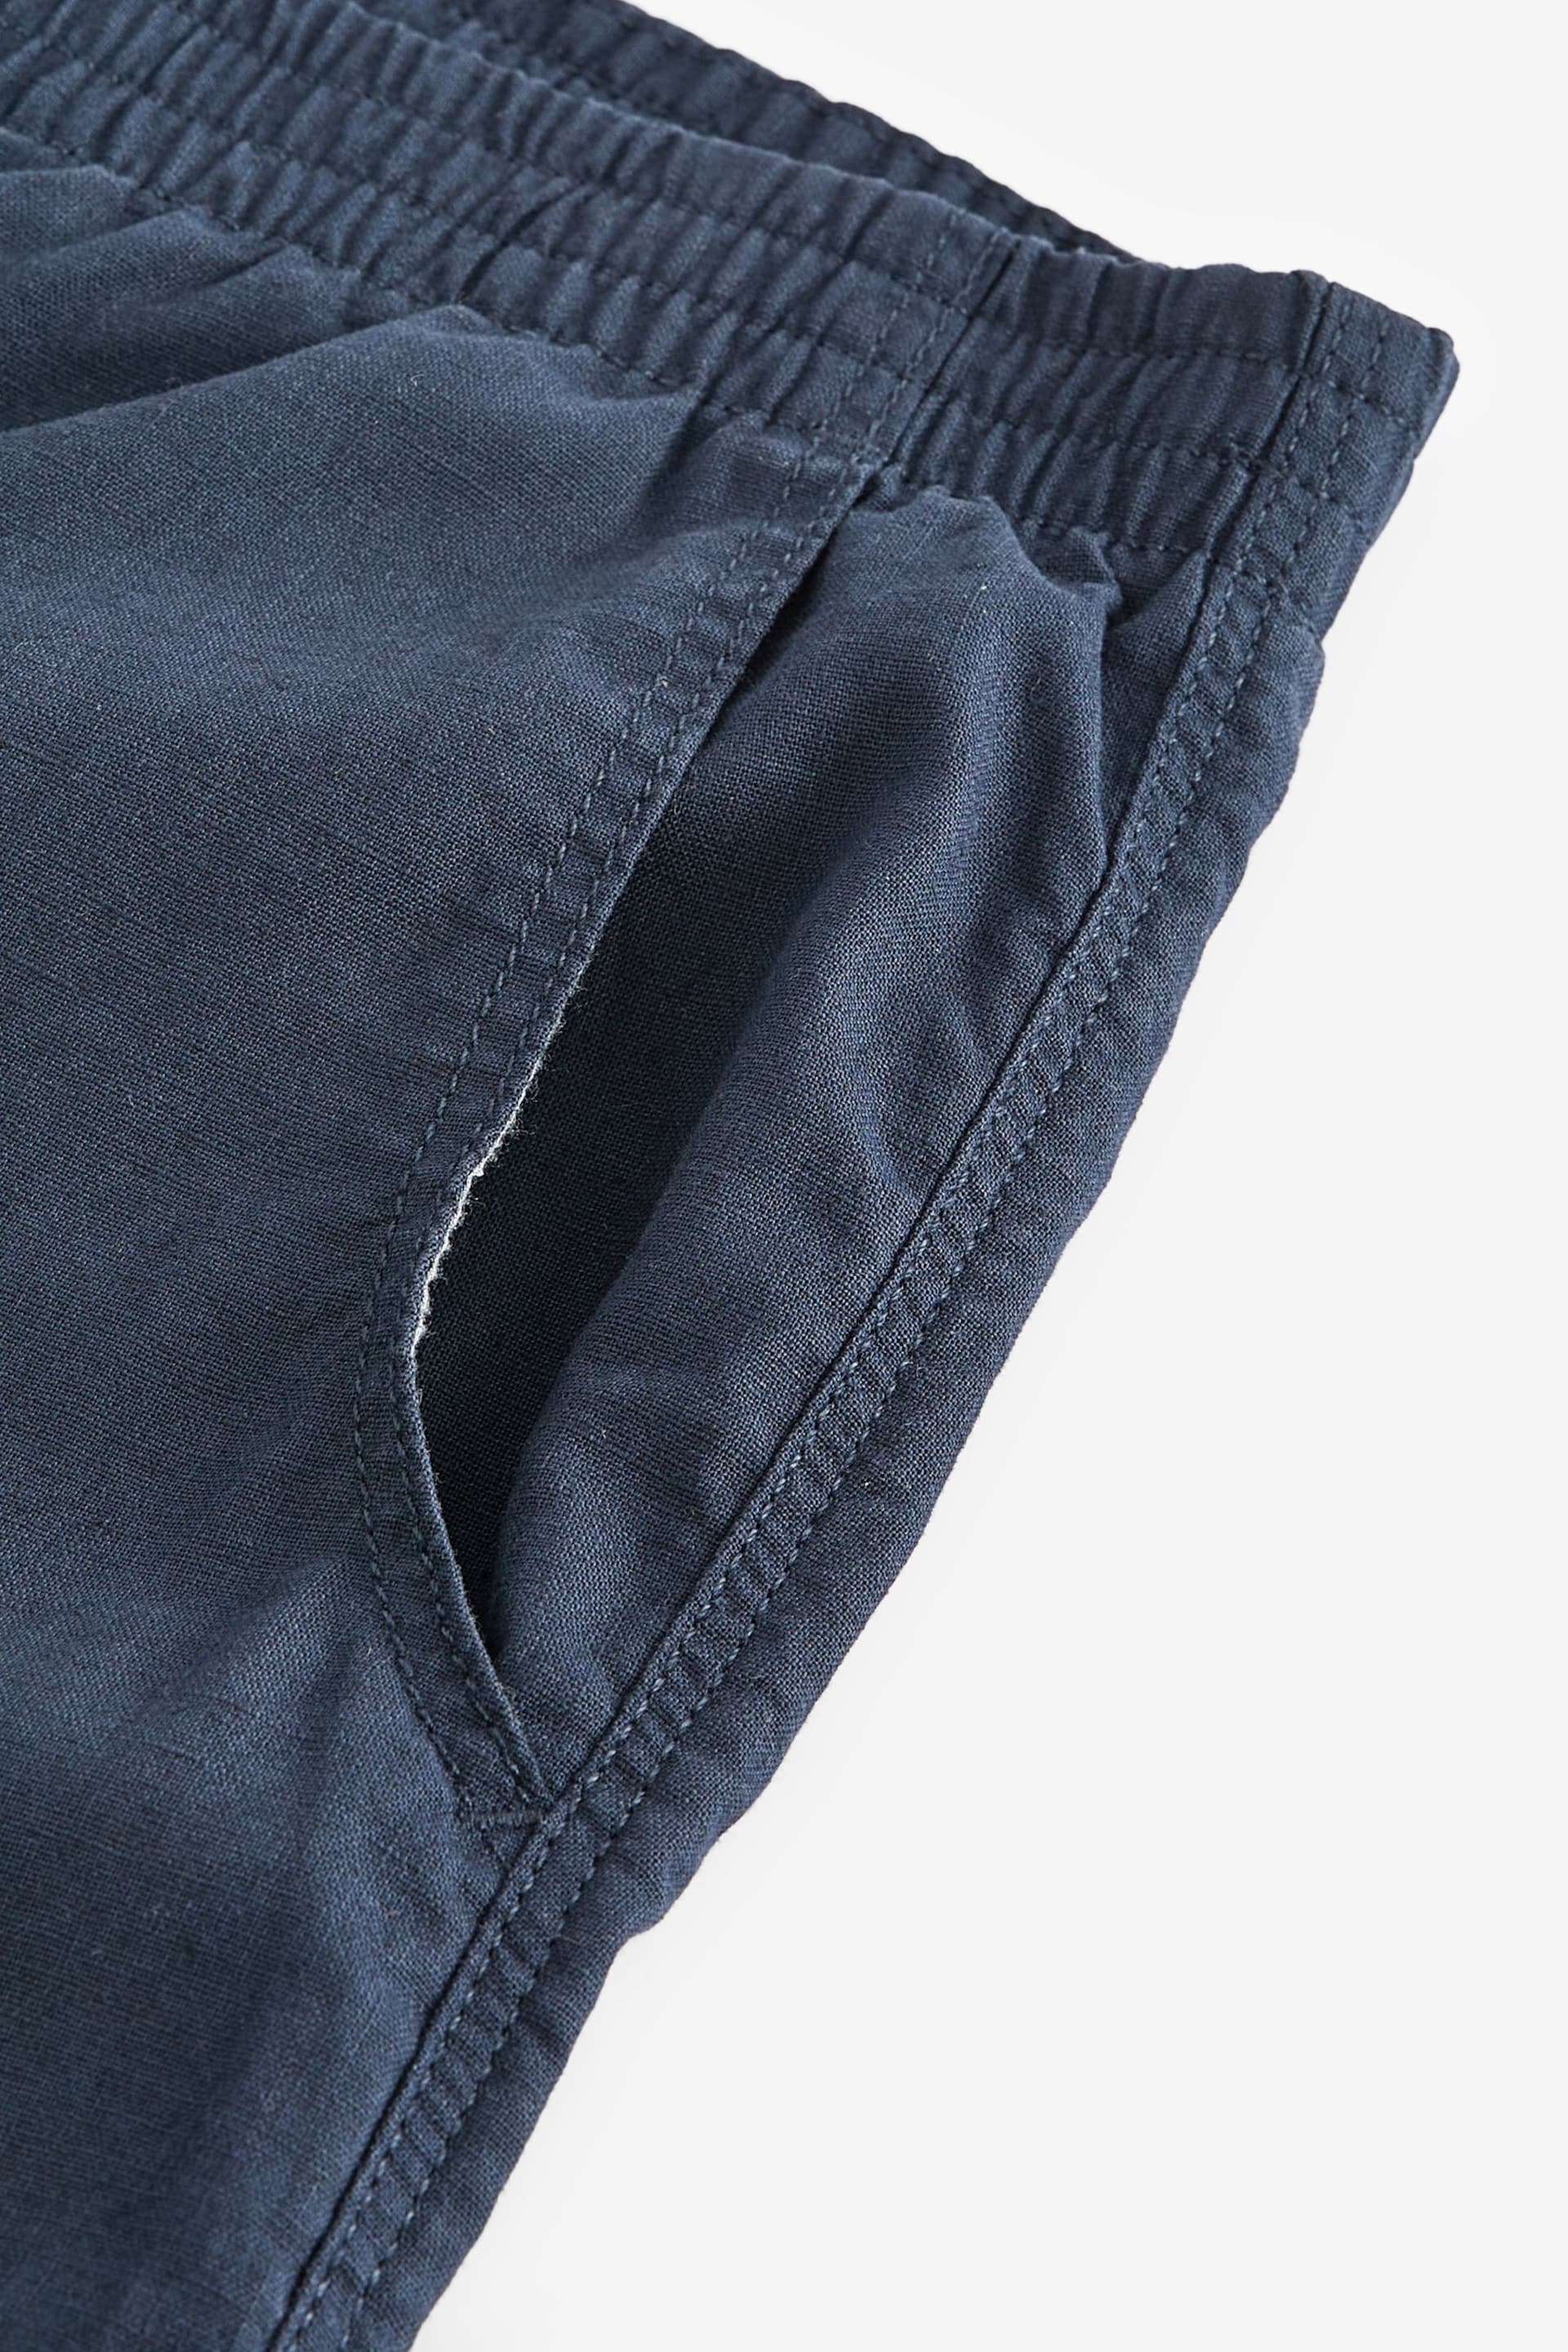 Navy Blue Slim Fit Linen Cotton Elasticated Drawstring Trousers - Image 10 of 11